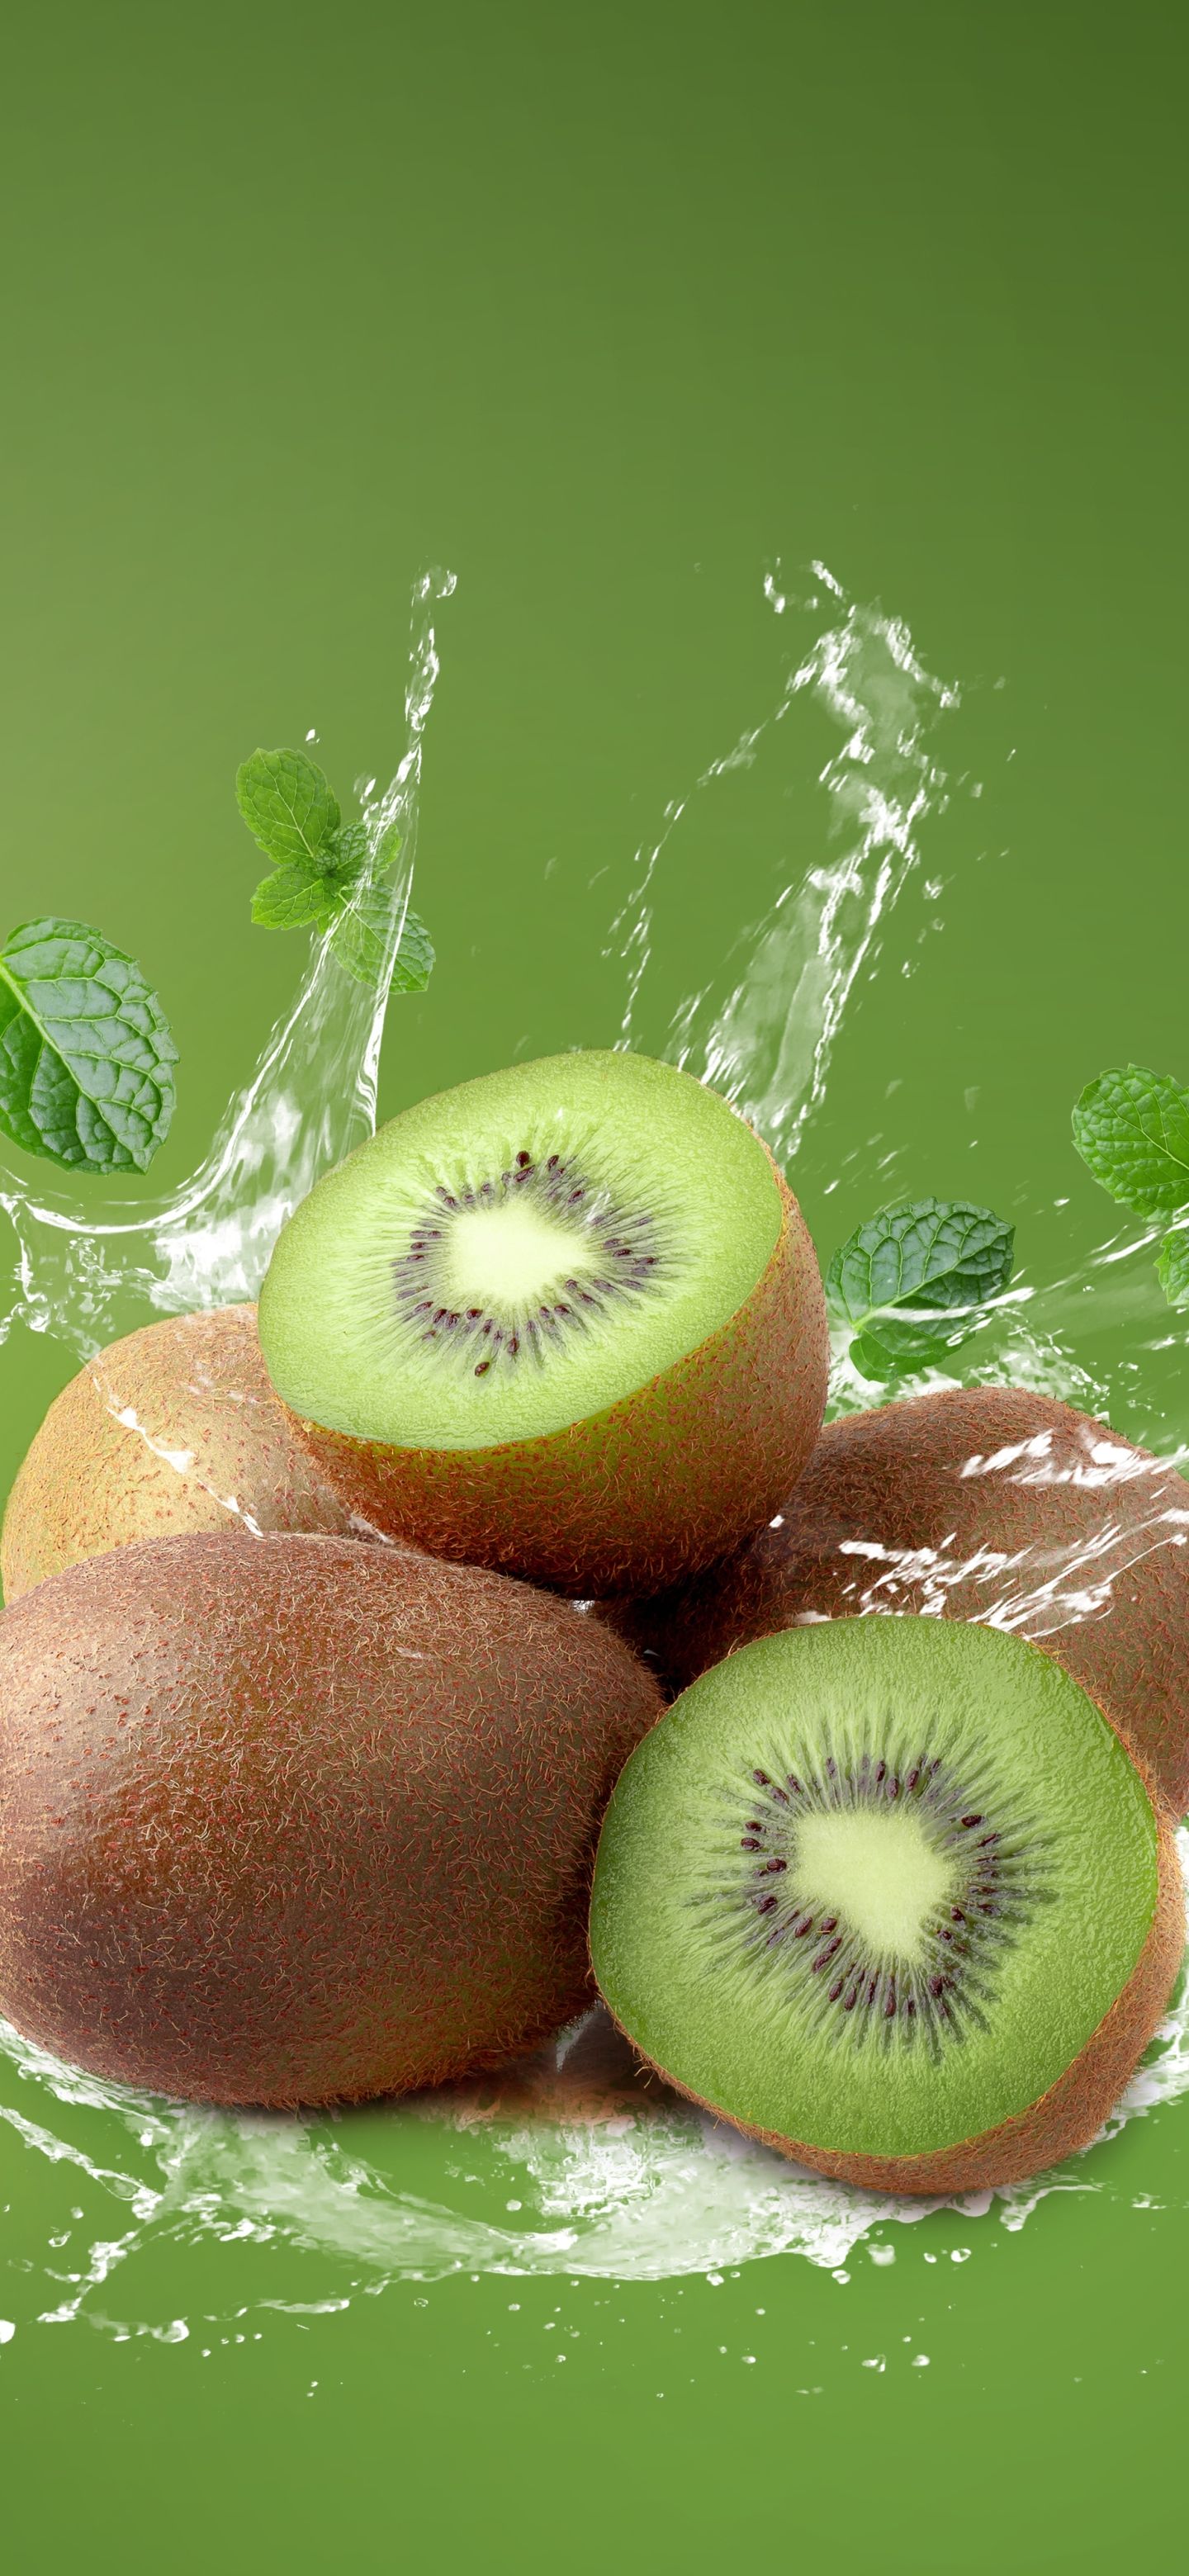 Mobile wallpaper: Fruits, Food, Kiwi, Fruit, 1189896 download the picture for free